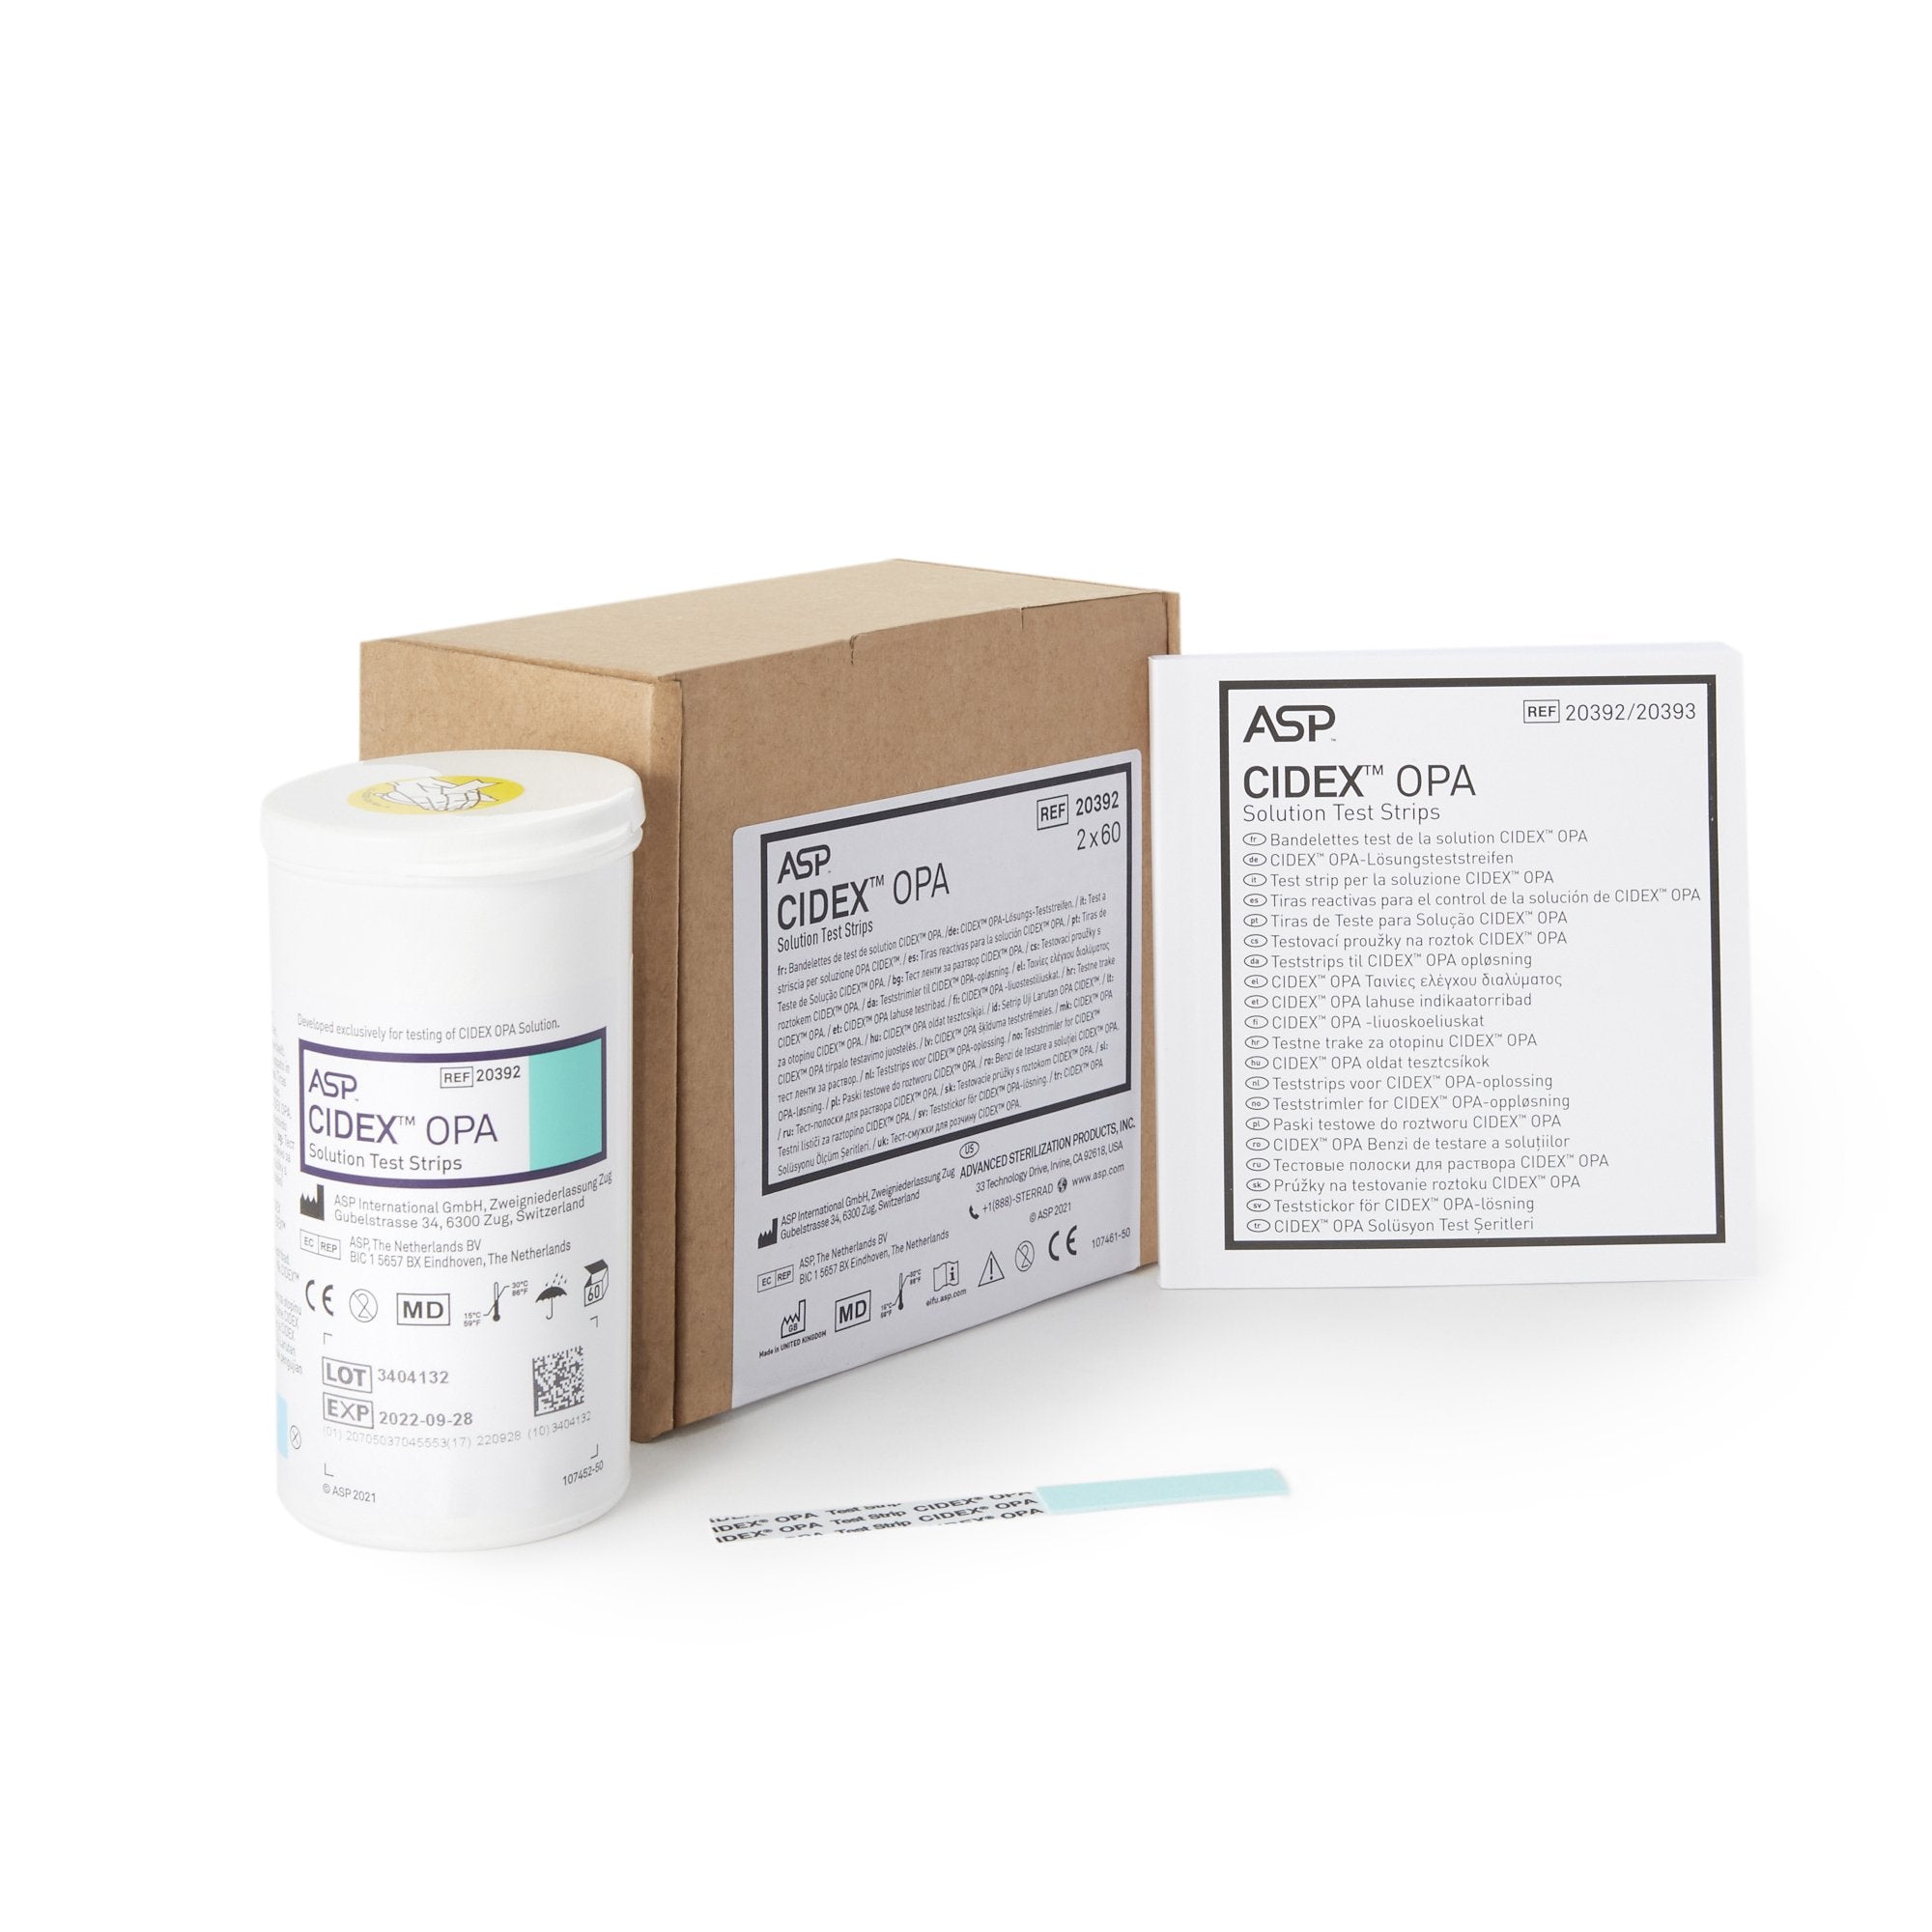 CIDEX® OPA CONCENTRATION INDICATOR TEST STRIPS, SOLD